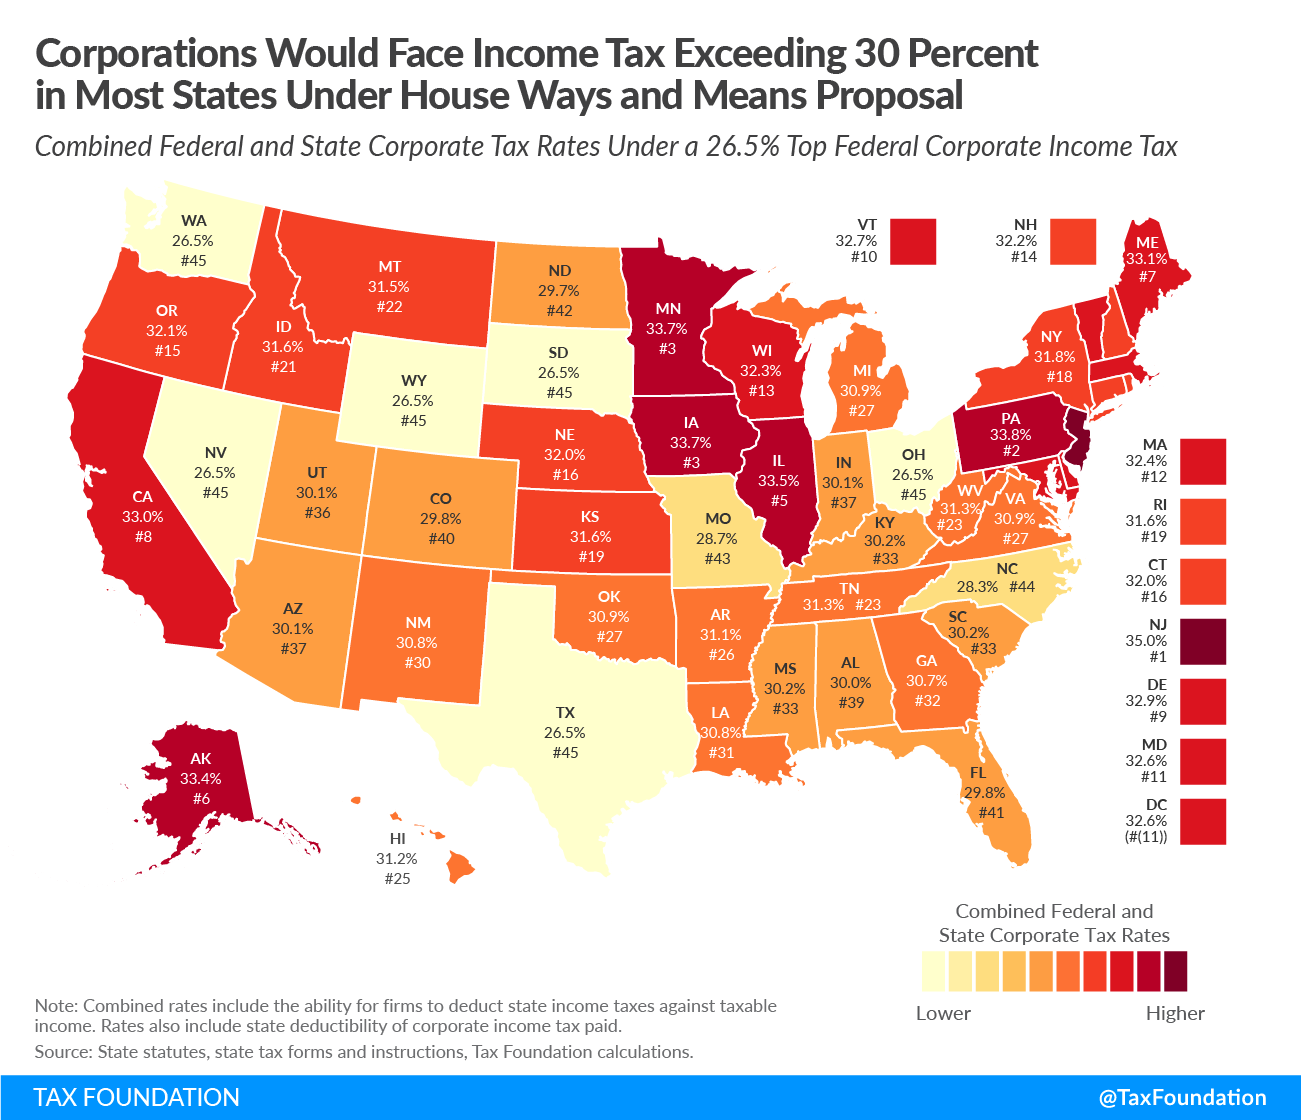 House Democrats corporate income tax rates proposal Corporations in Most States Would Face Income Tax Rate Exceeding 30 Percent Under Ways and Means Proposal